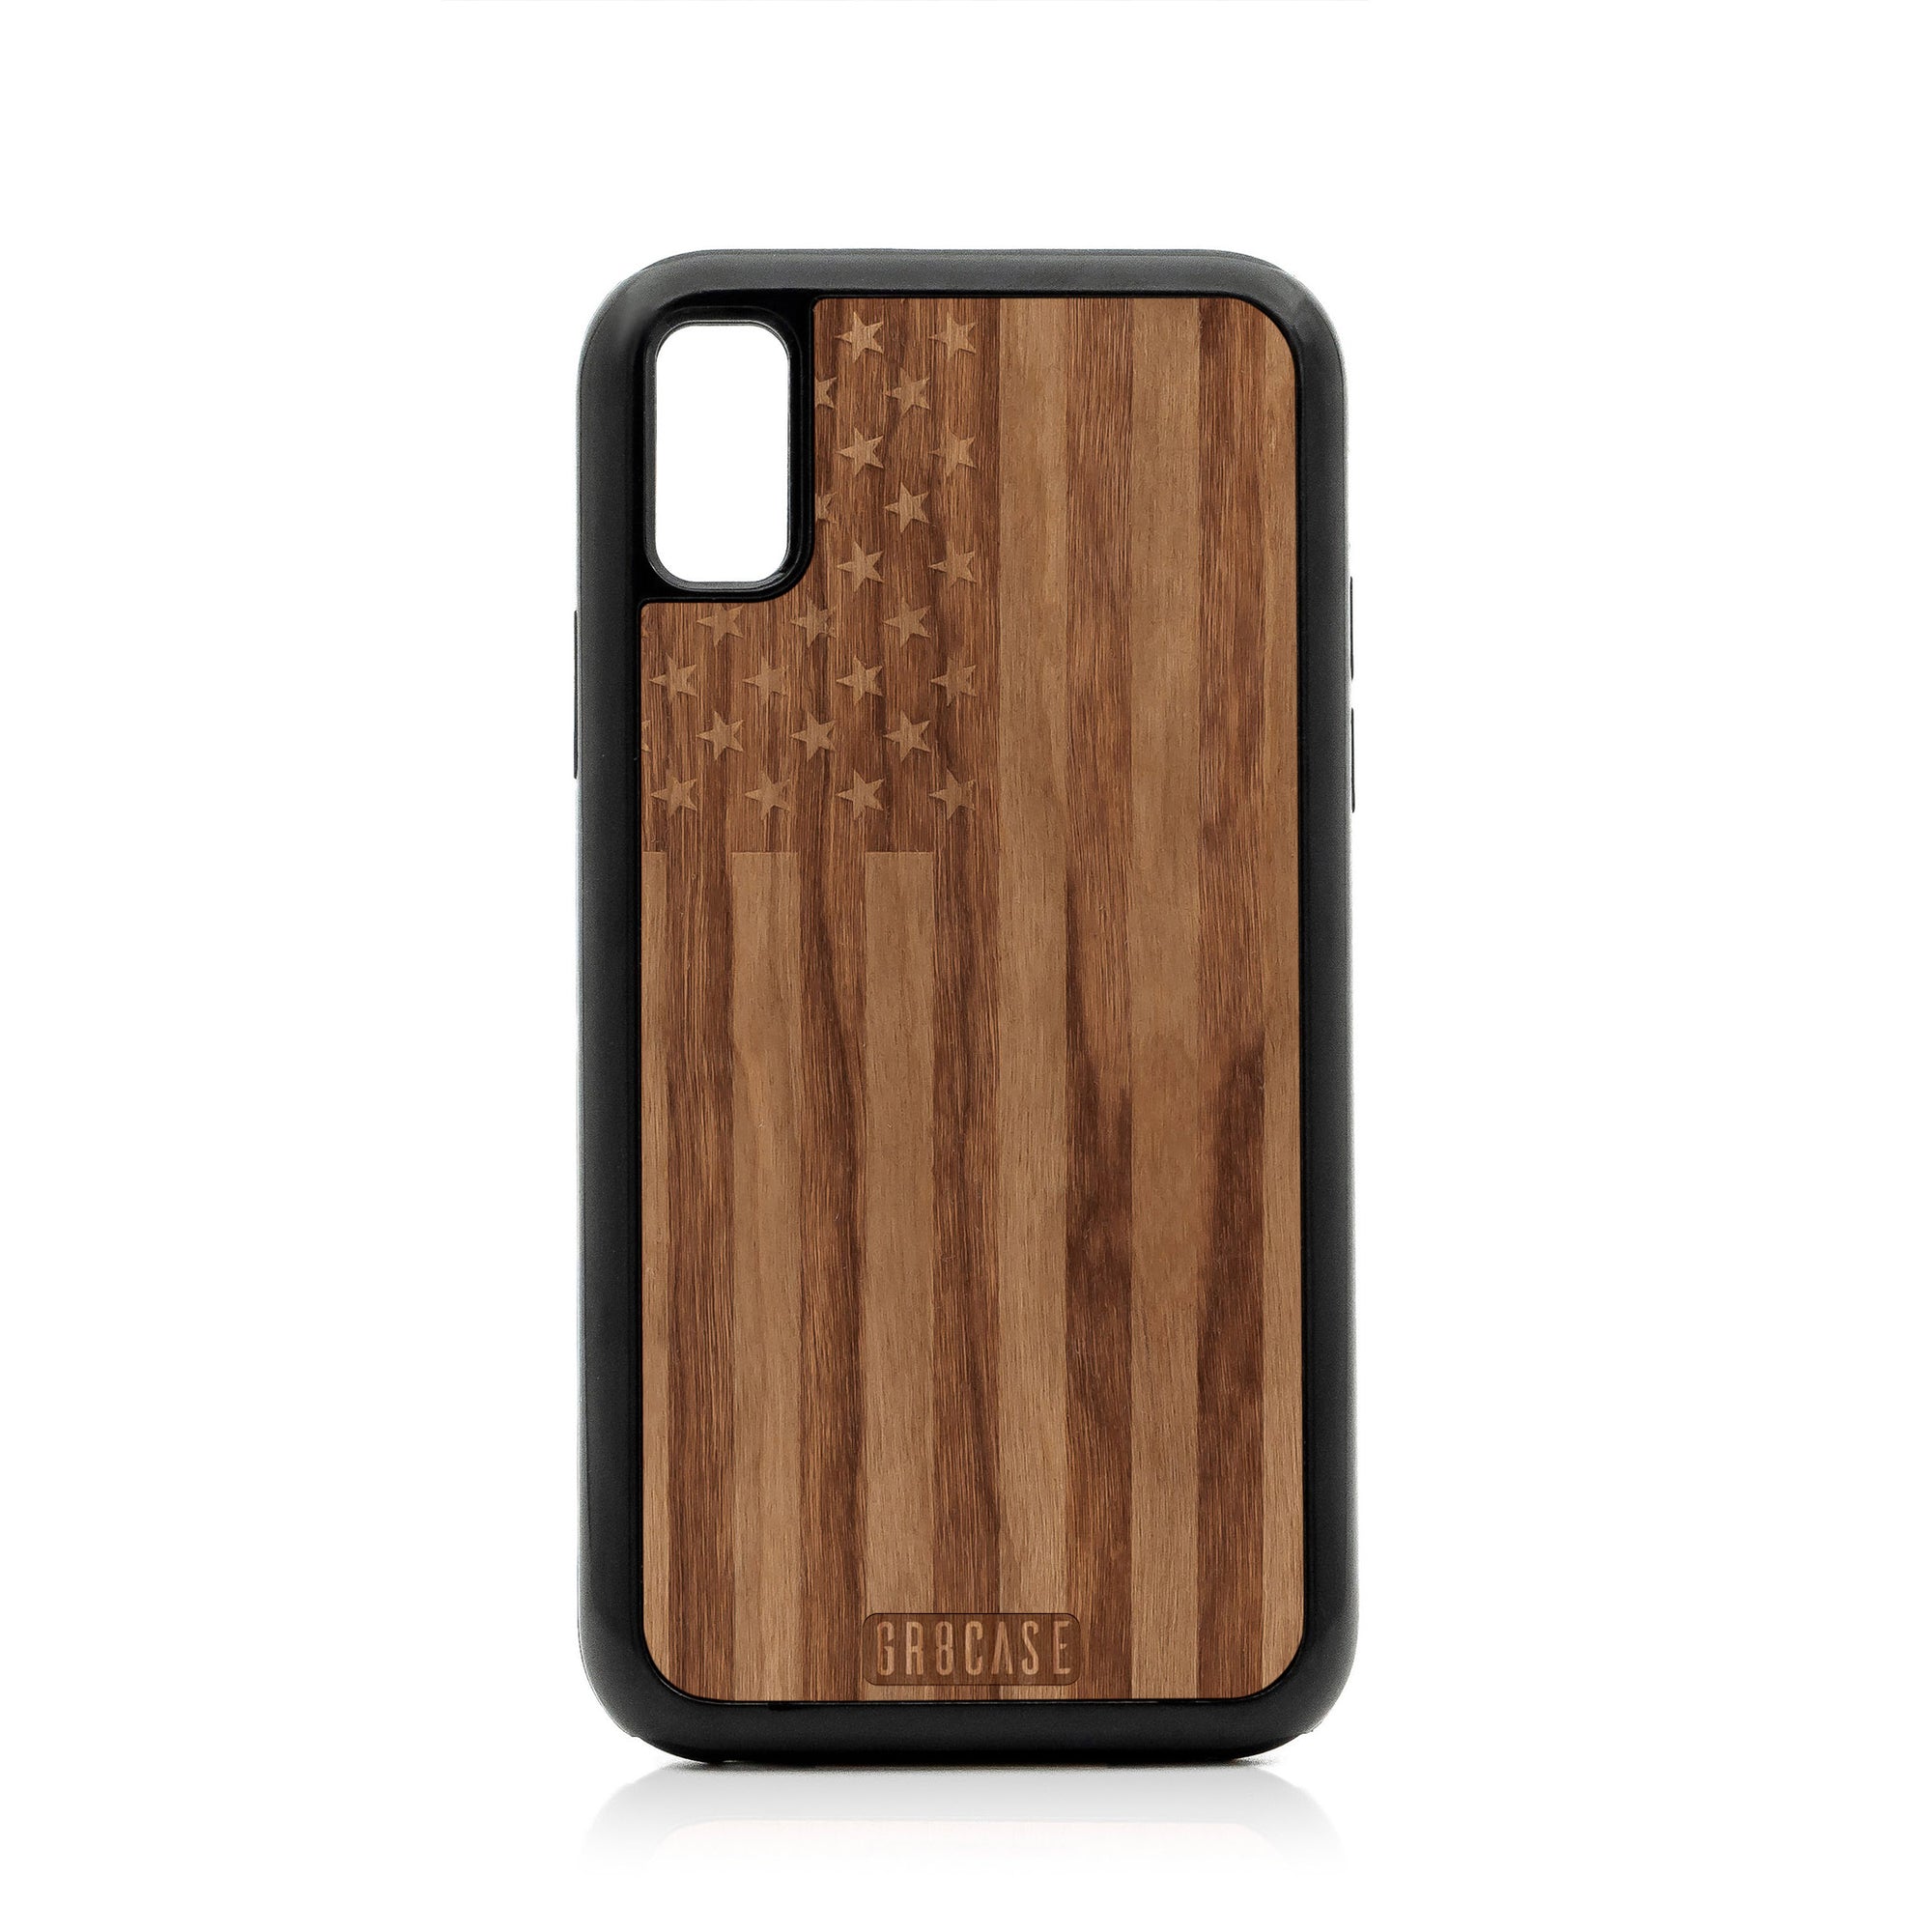 USA Flag Design Wood Case For iPhone X/XS